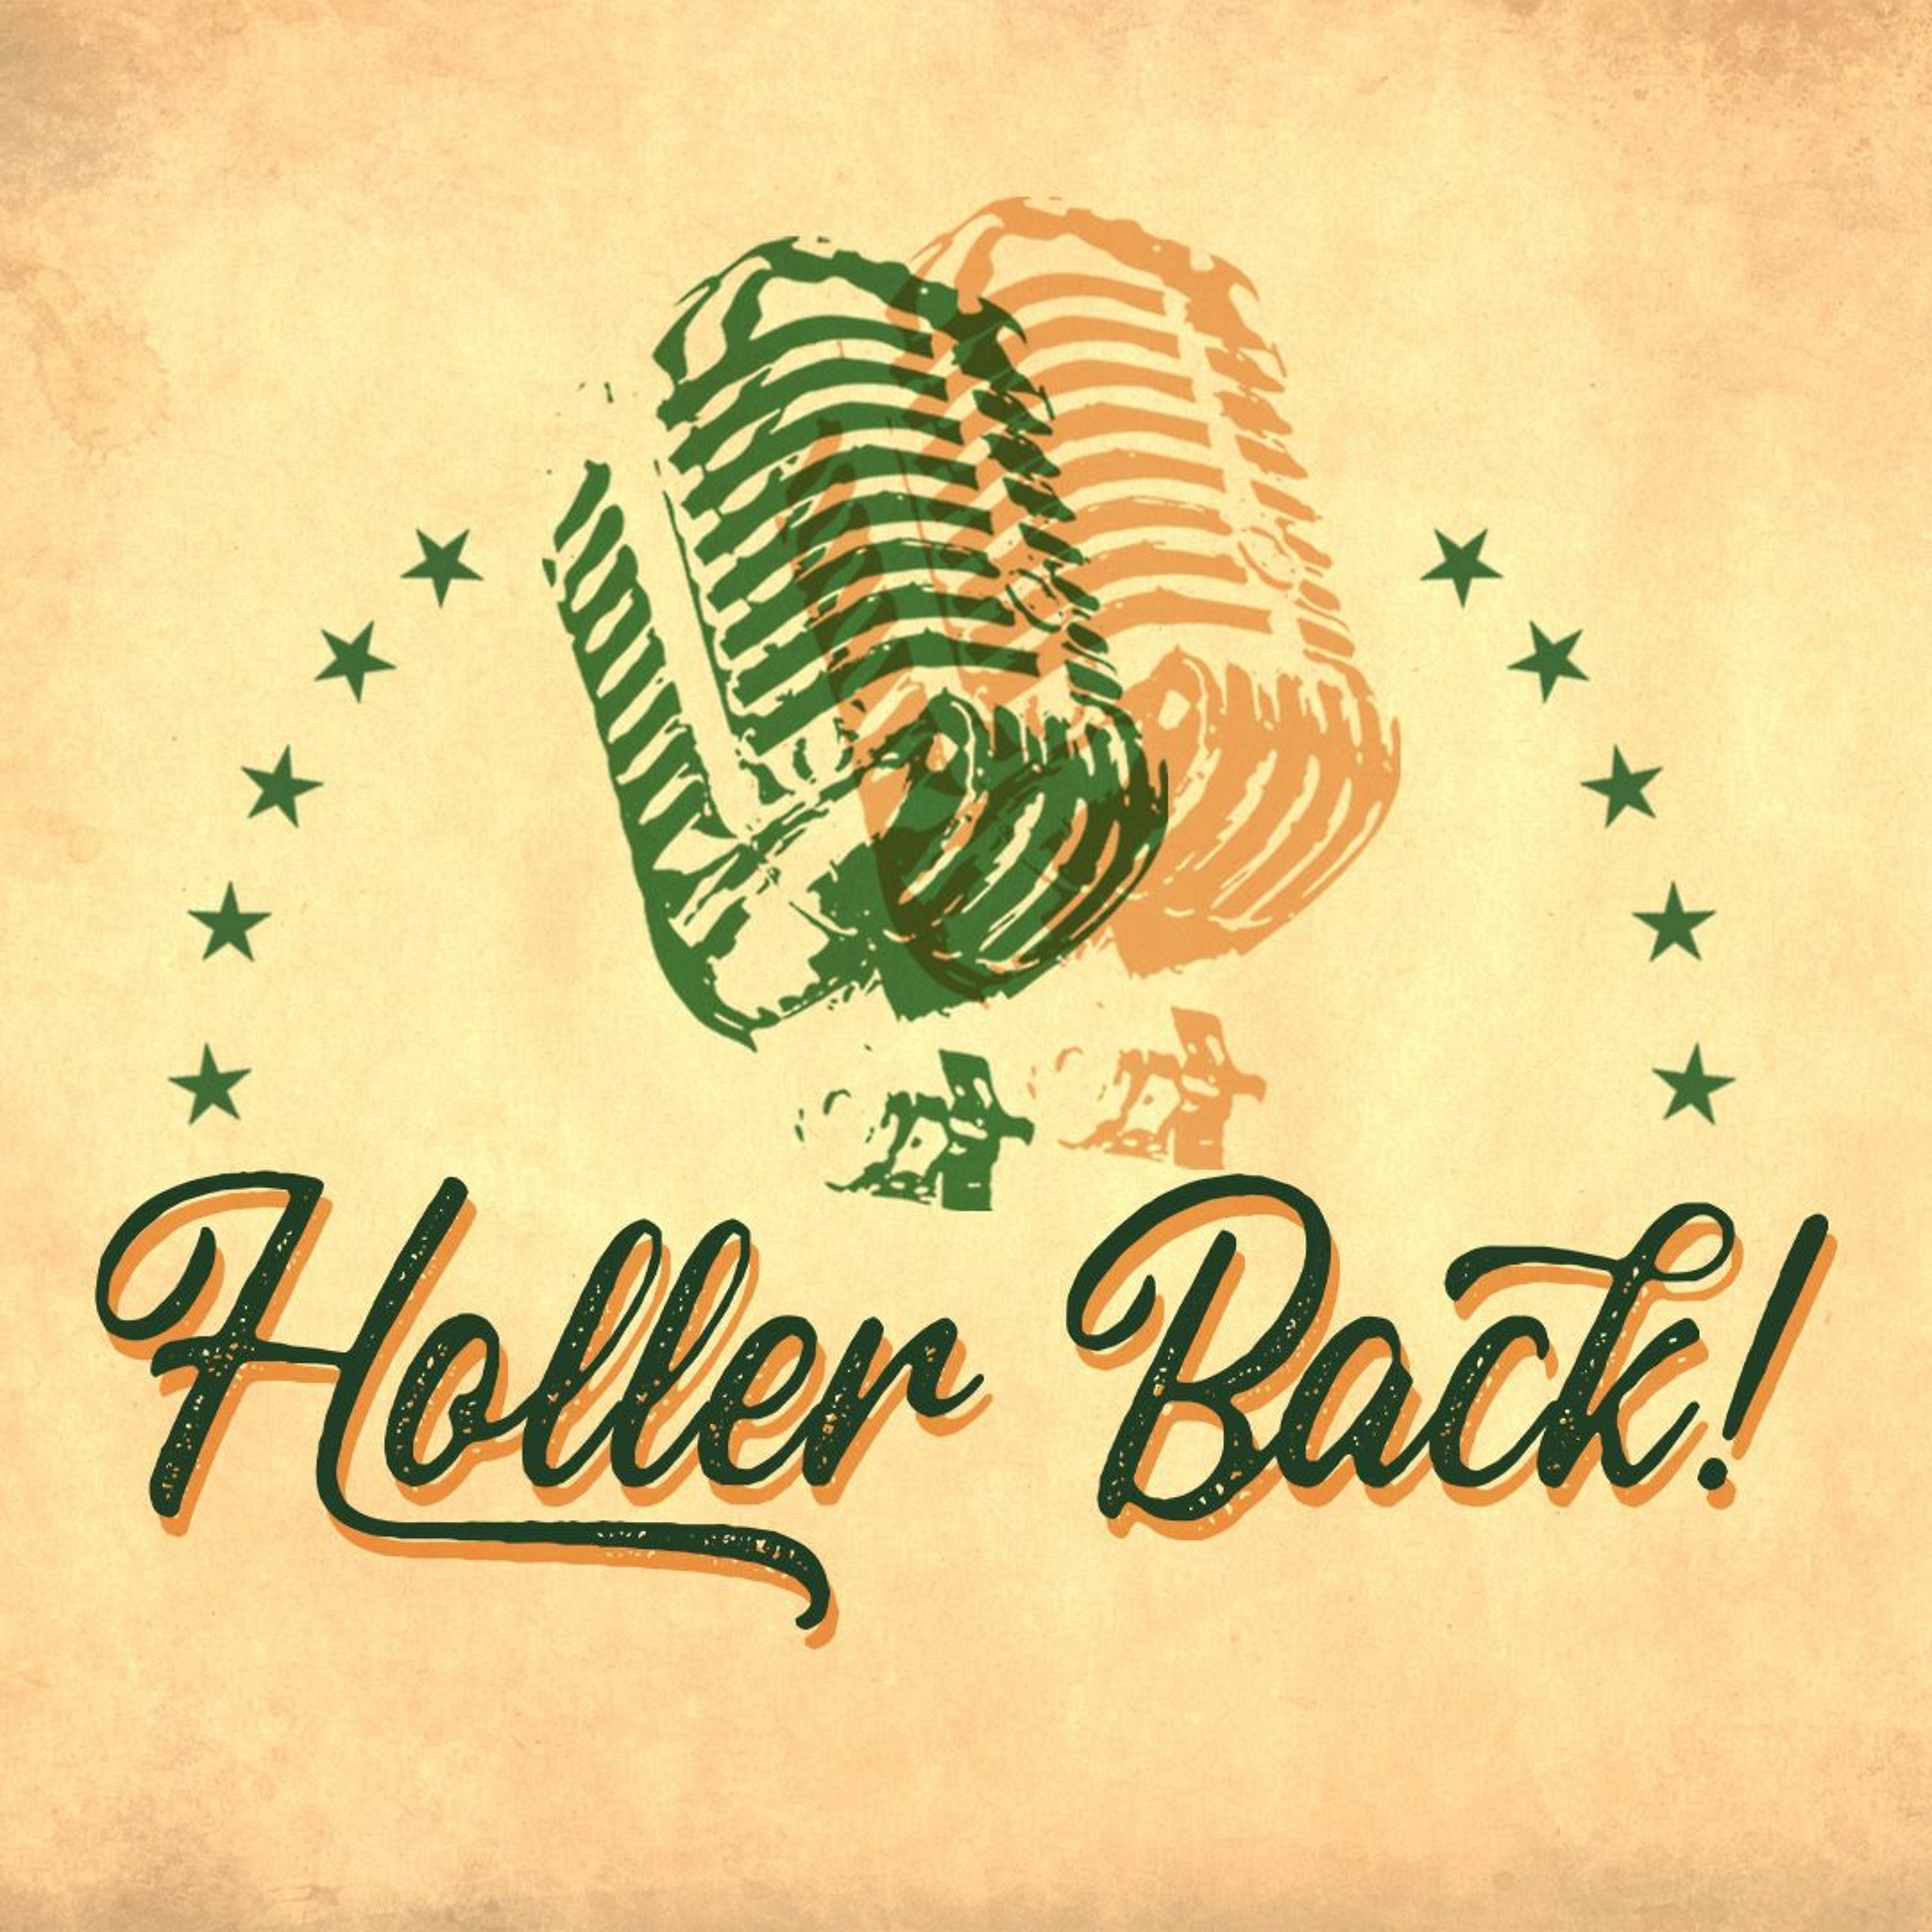 Holler Back! Season 4. Episode 1: “What is a Holler, anyway?”